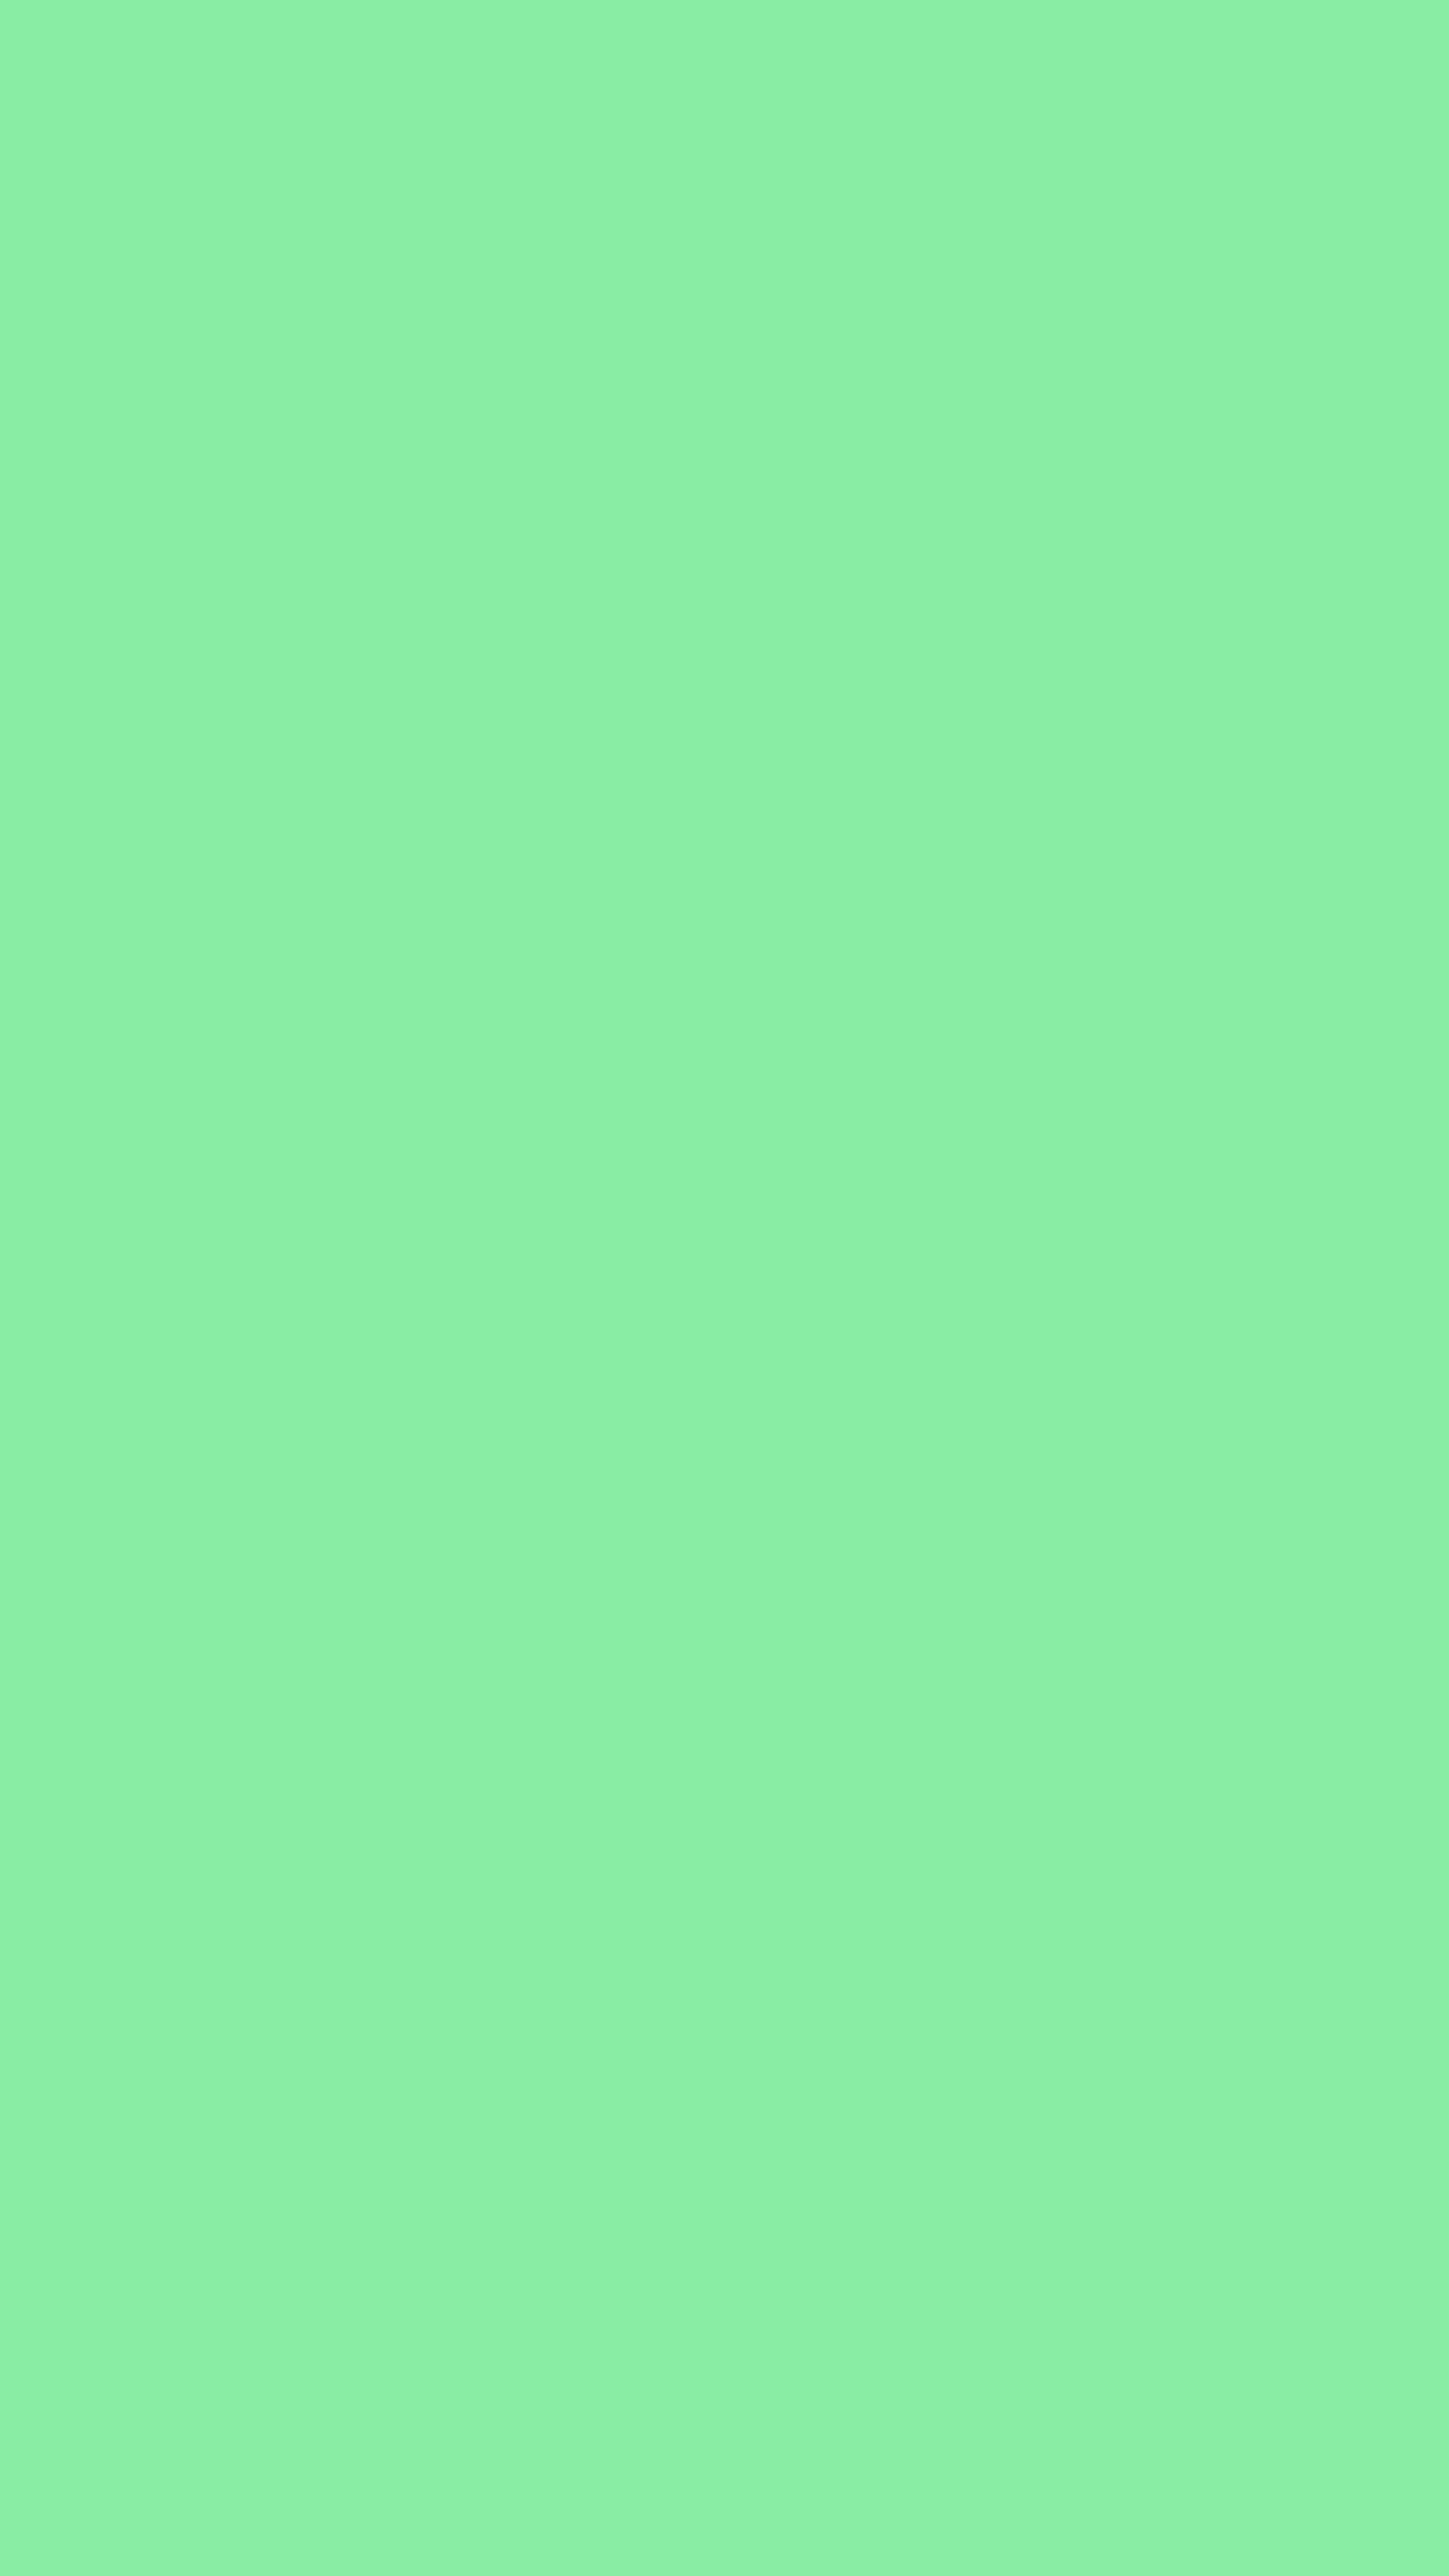 51421 download wallpaper plain, background, green, texture, textures, minimalism, color, monochromatic screensavers and pictures for free